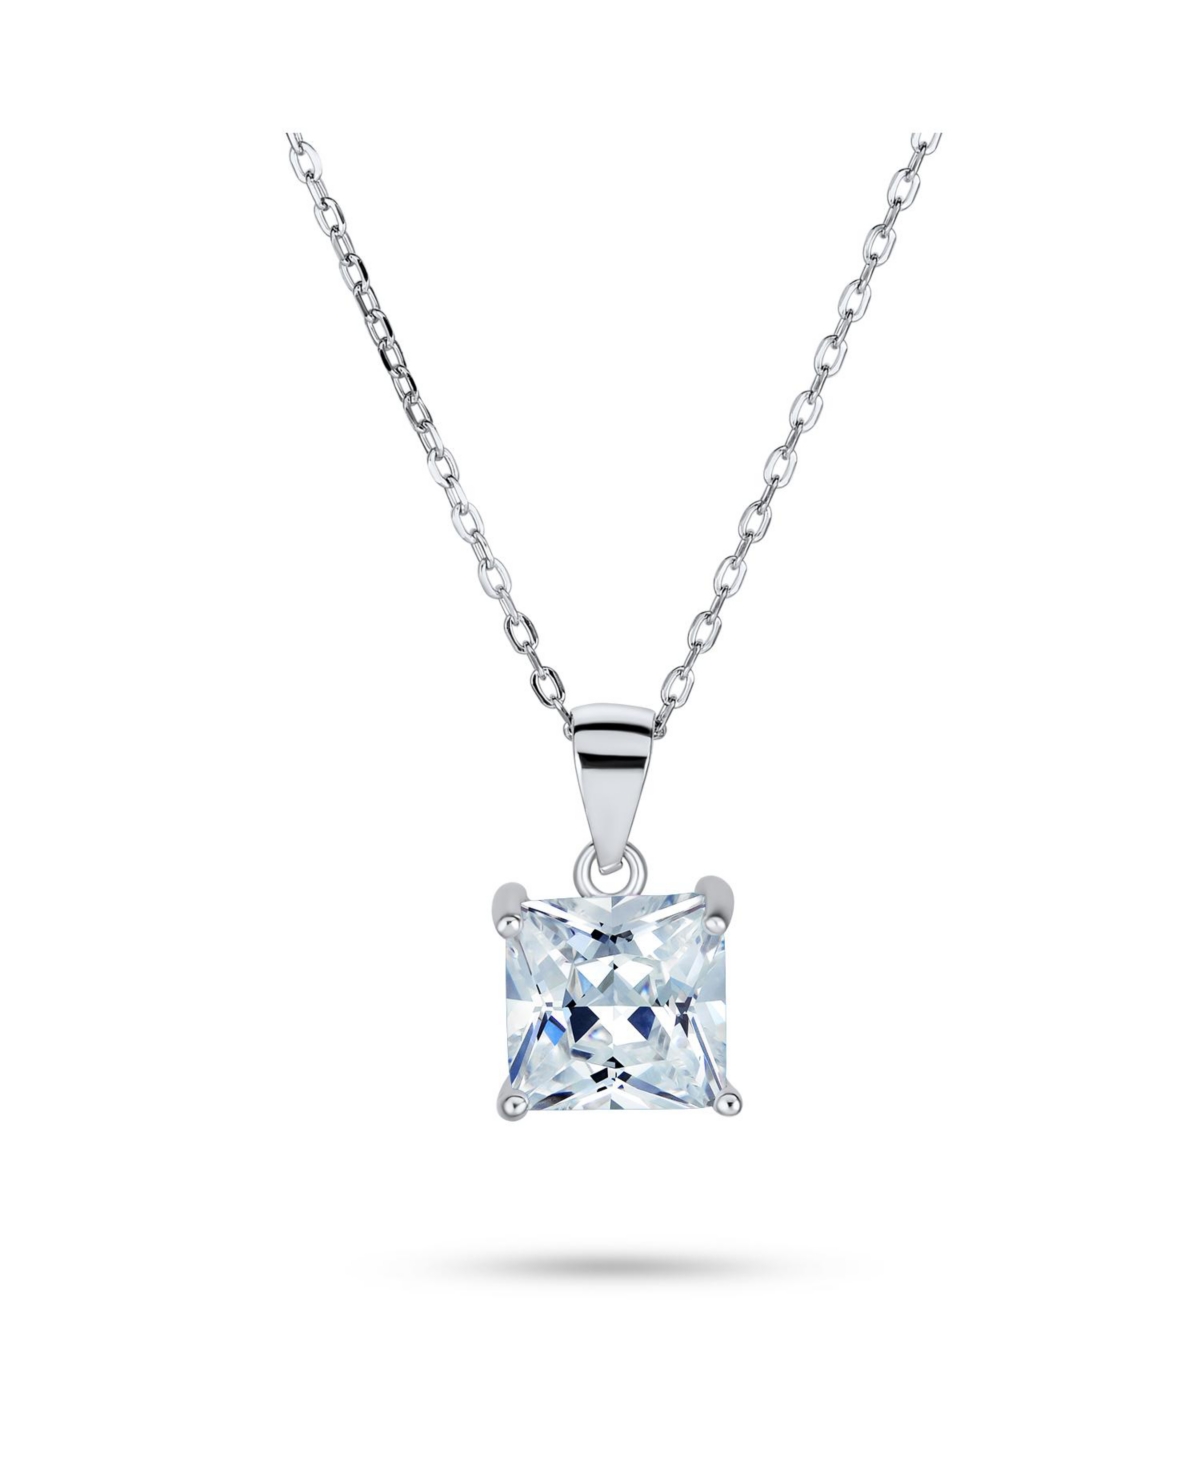 Classic Dainty 4 Prong Set 1.25 Ct Solitaire Square Princess Cut Clear Cubic Zirconia Cz Pendant Necklace For Women Teens .925 Sterling